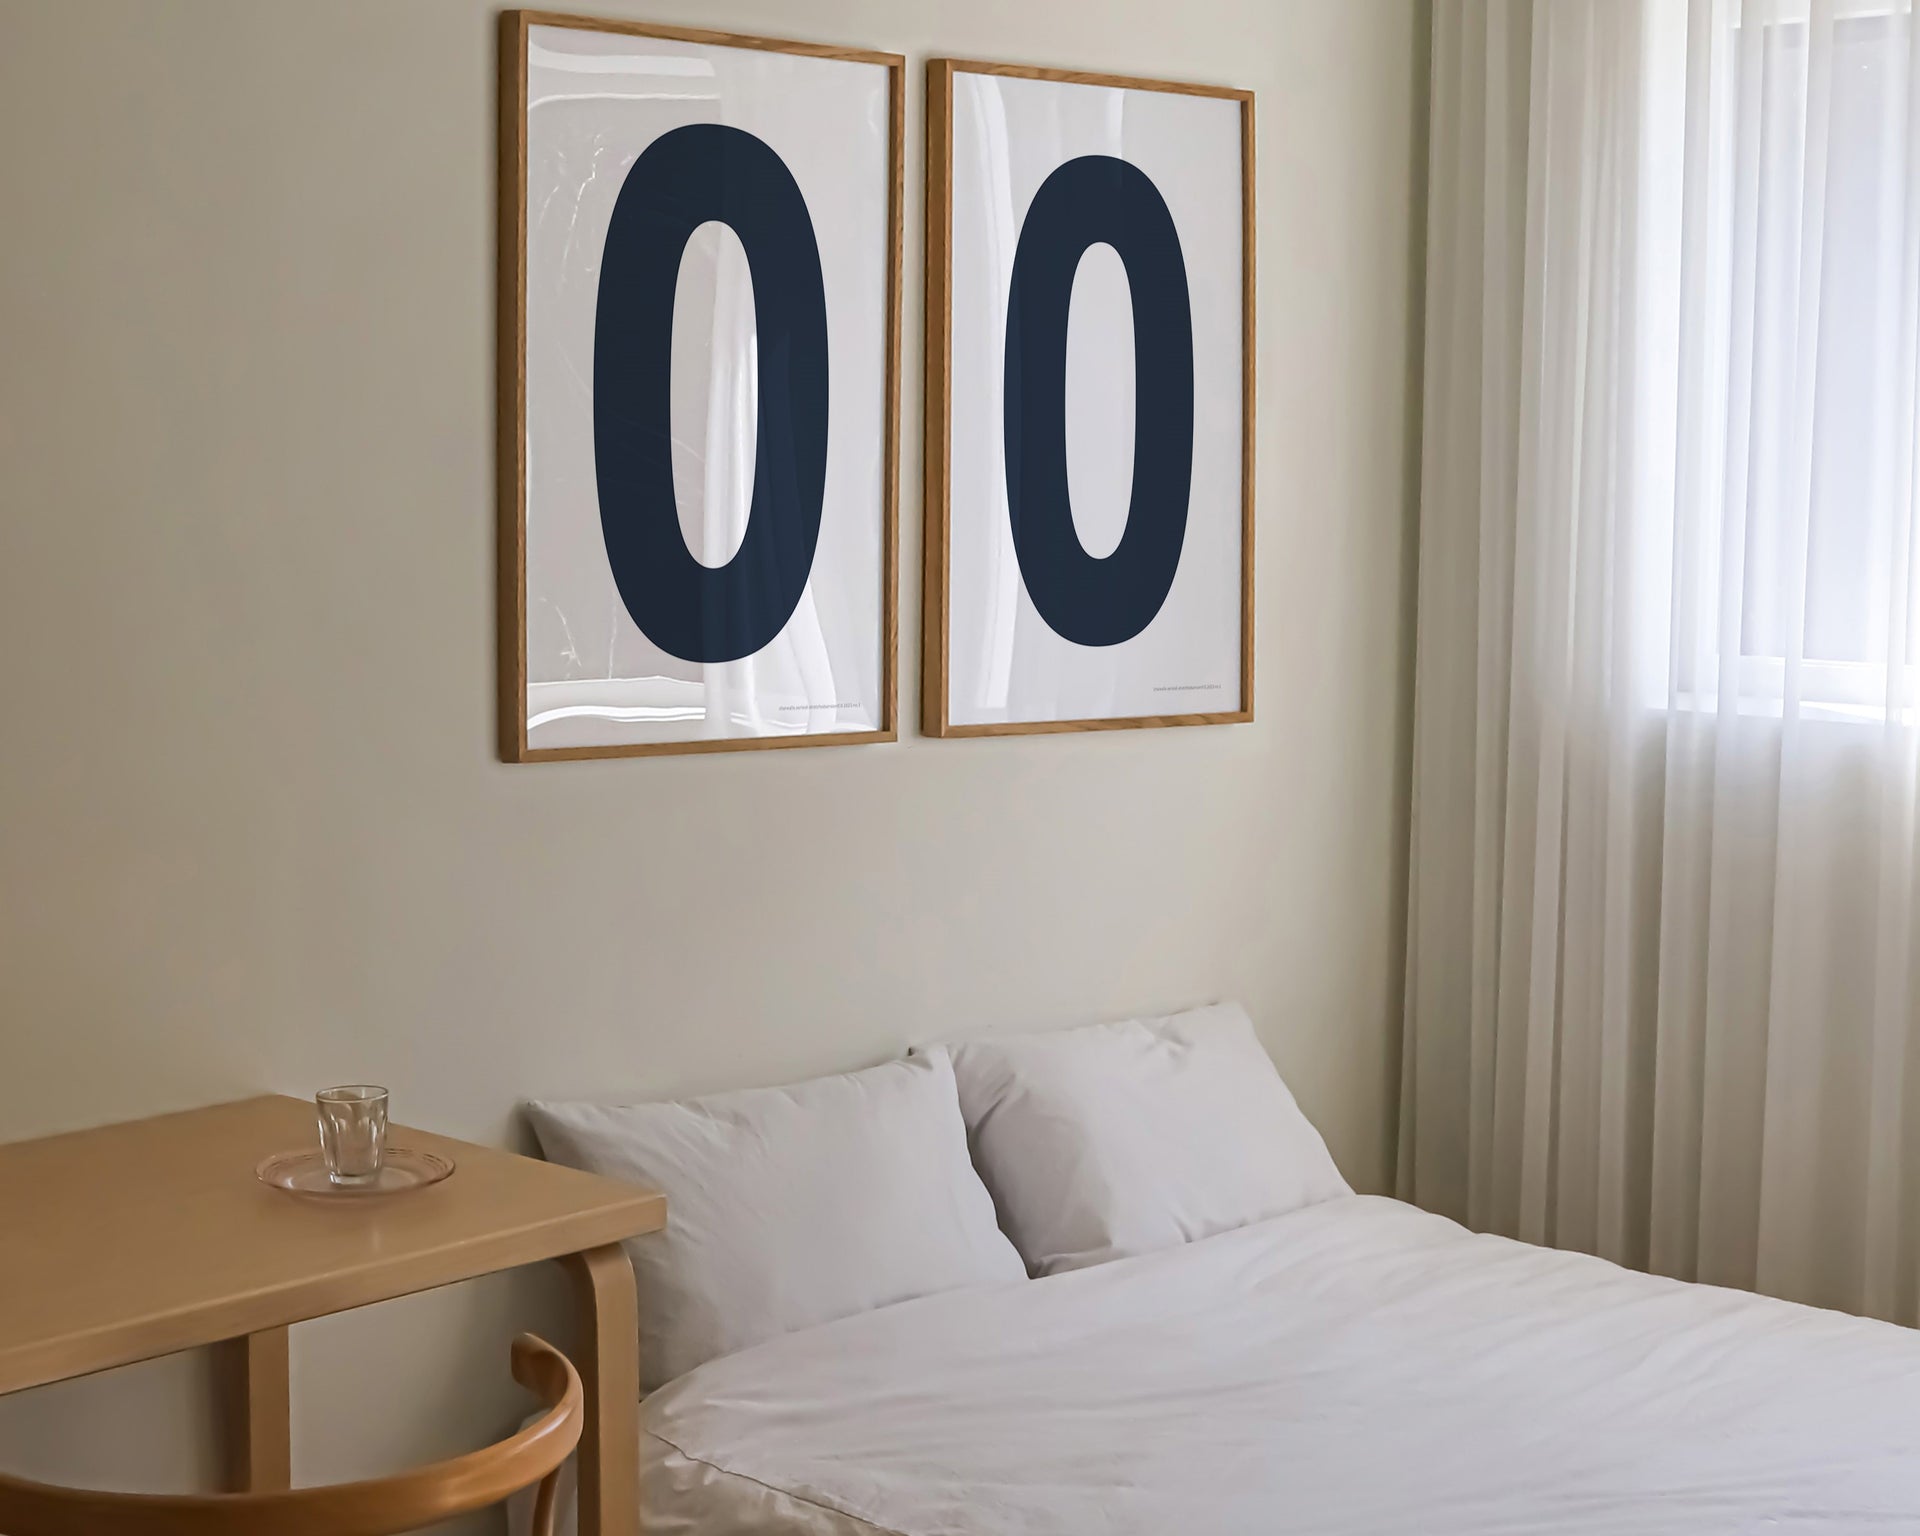 Two framed navy blue and white number zero art prints hanging above a bed in a modern bedroom.